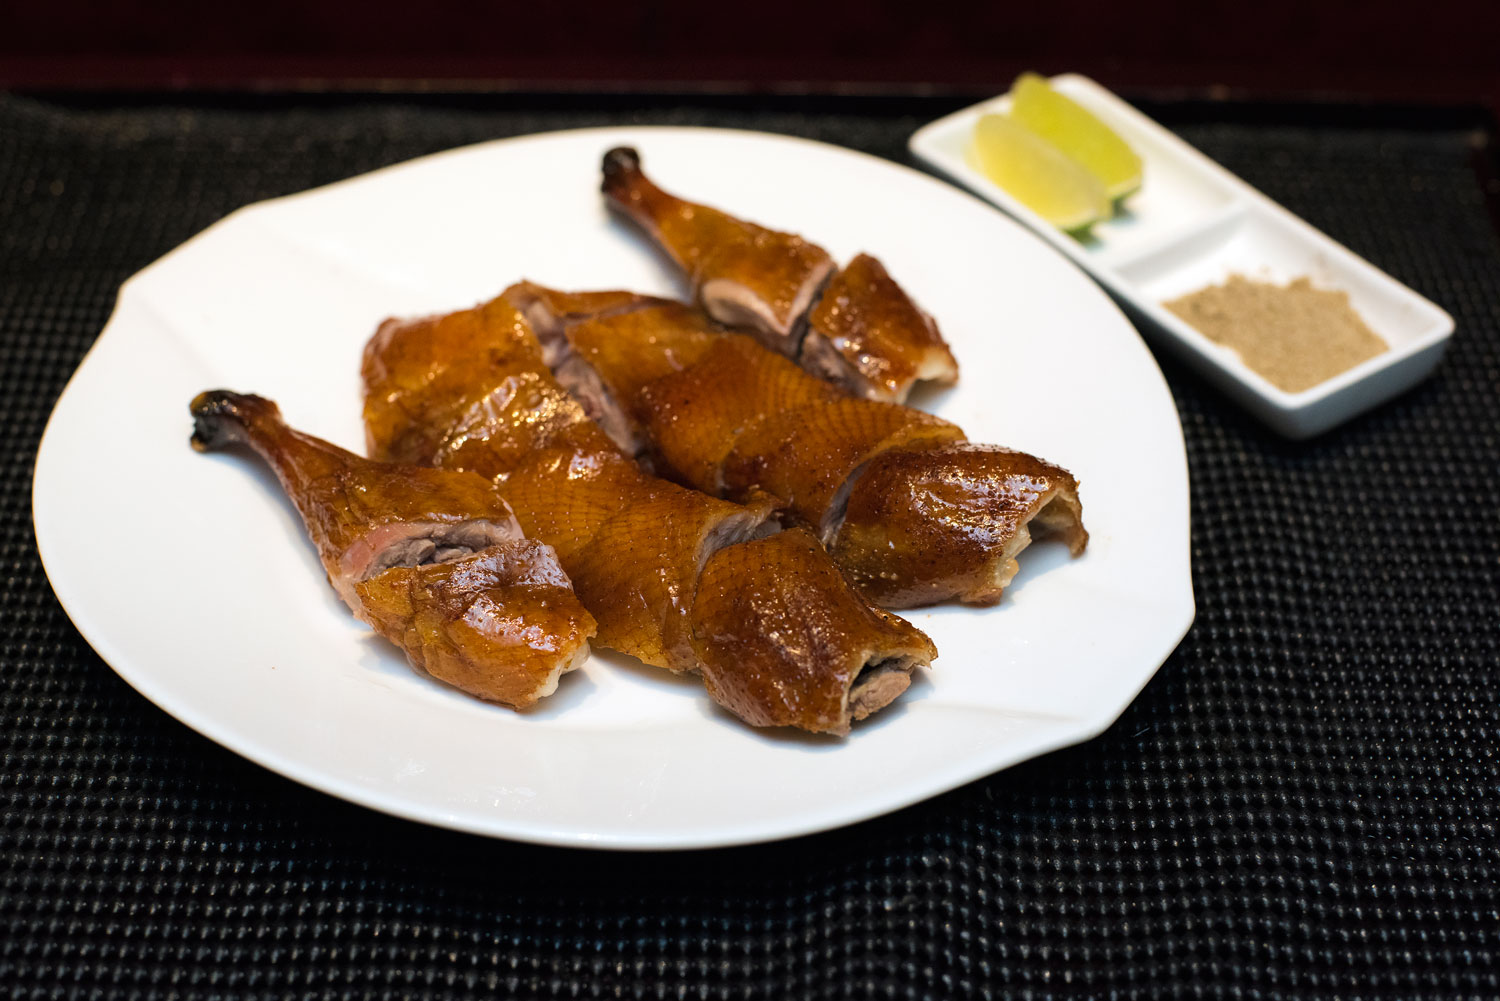 The roast baby duck is an all time best seller of La Palais and requires an advance booking of at least 1 week. 